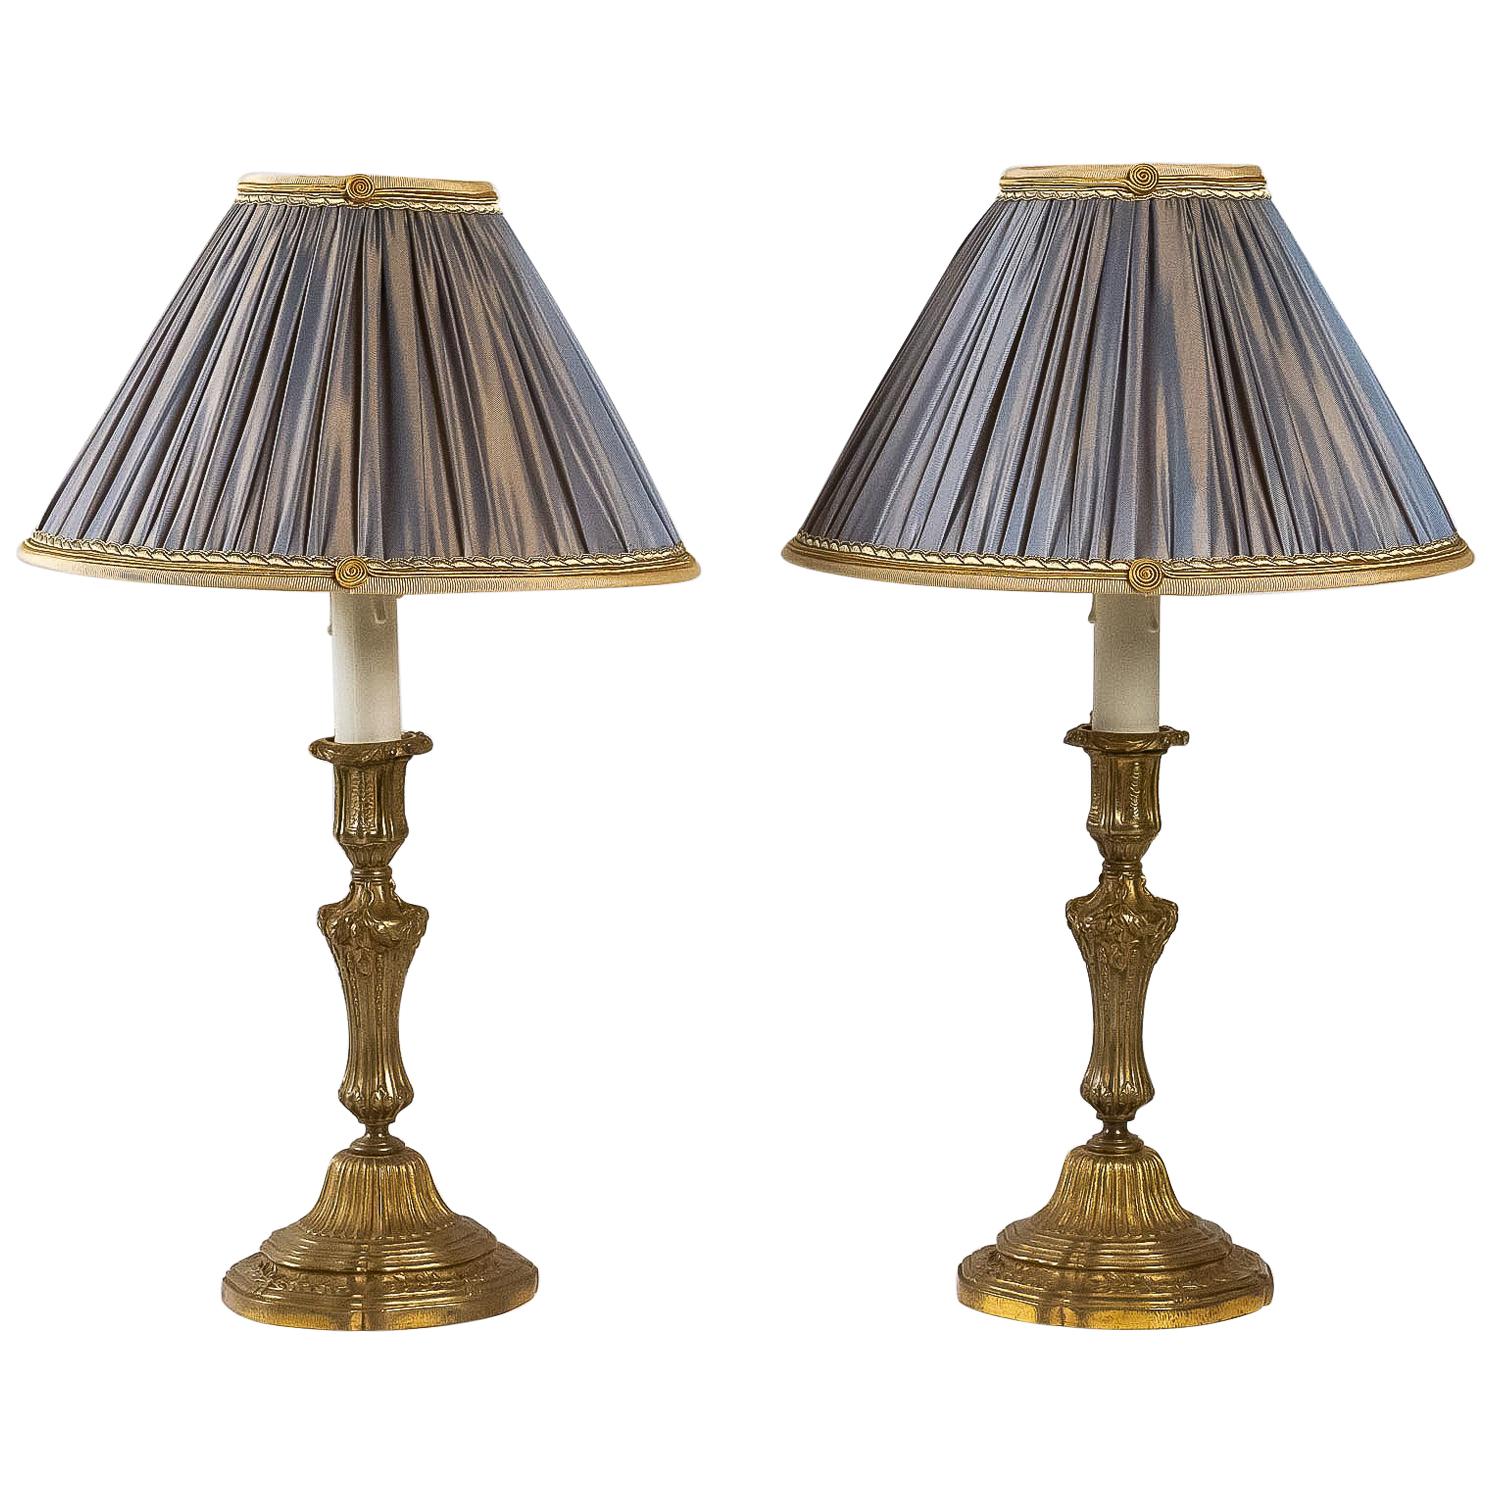 French 18th Century Style Pair of Gilt-Bronze Candlestick Lamps